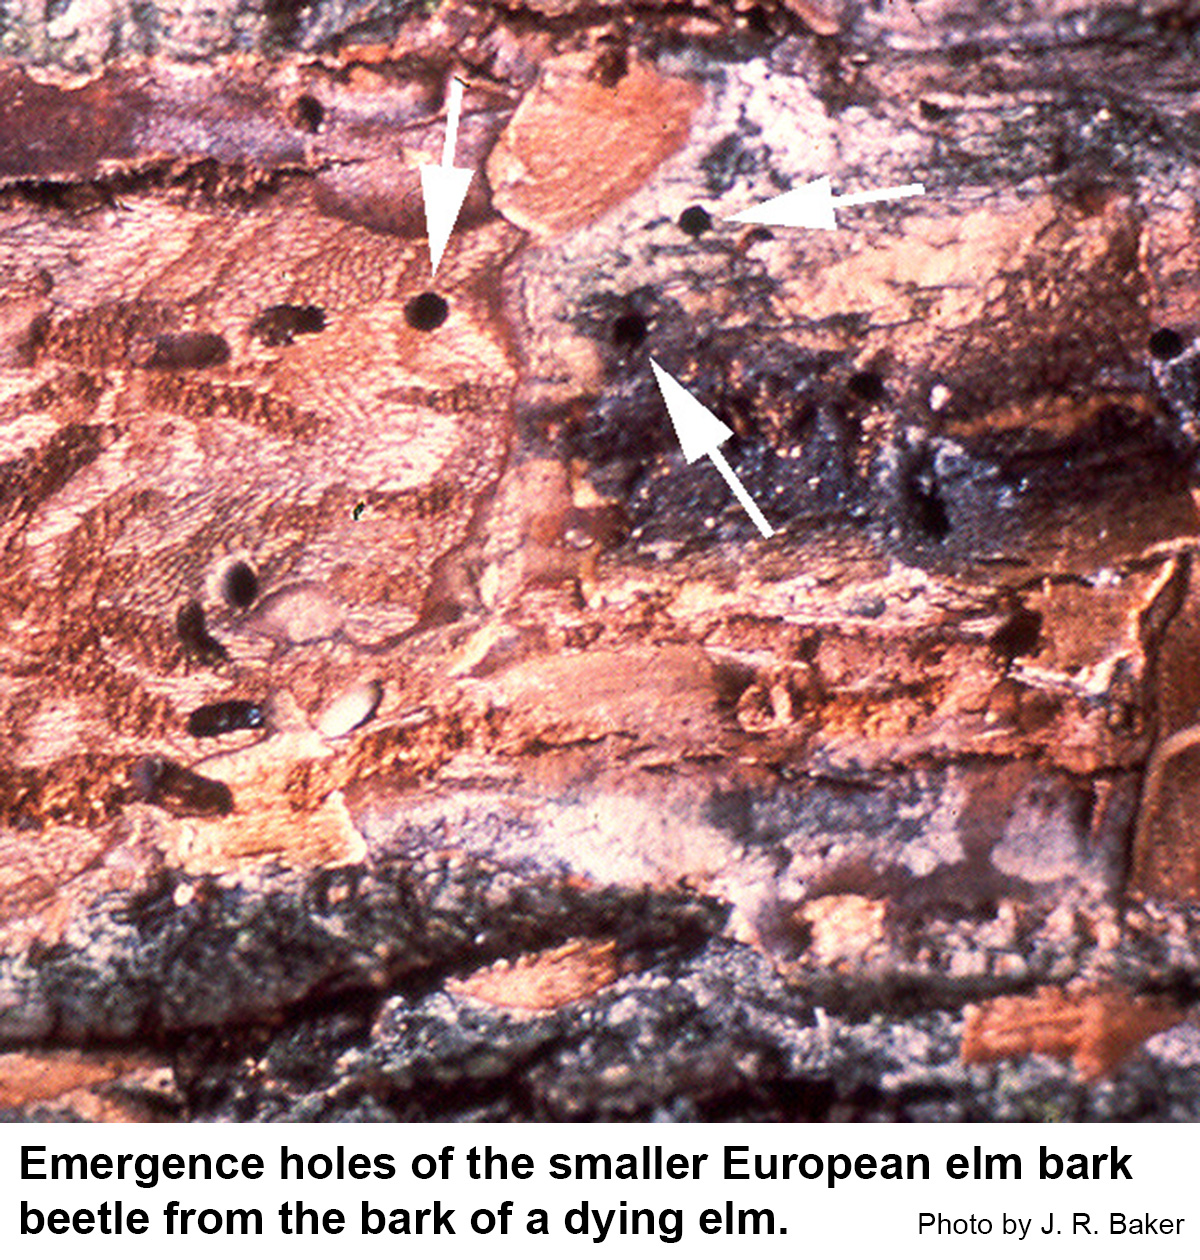 Emergence holes of the smaller European elm bark beetle from the bark of a dying elm.